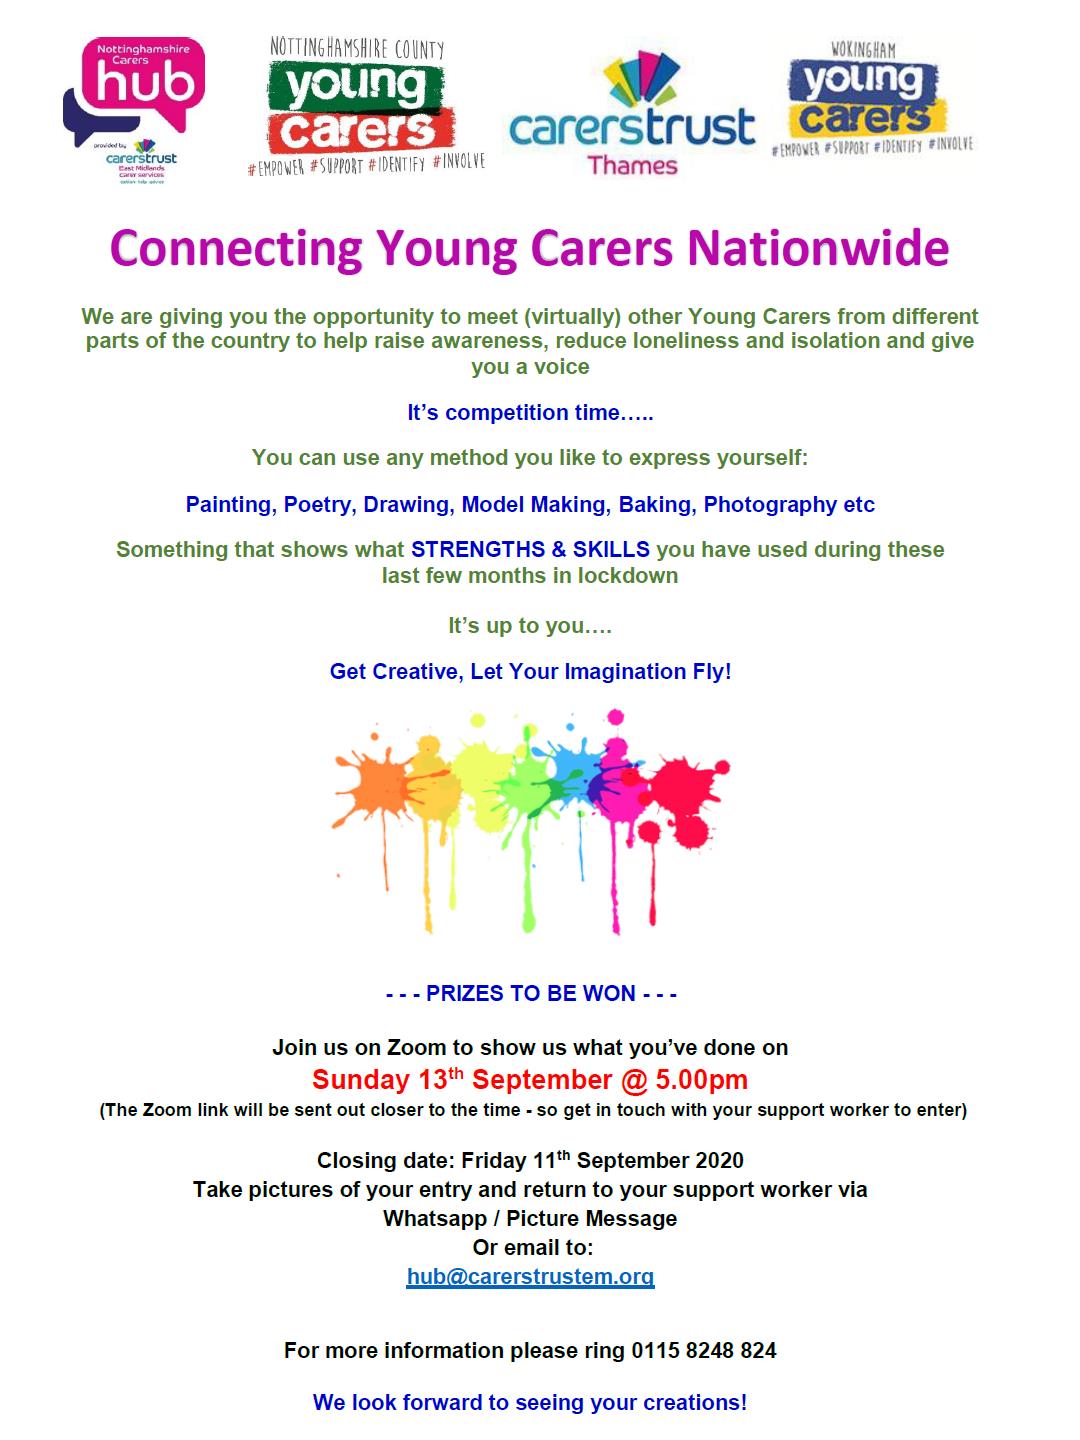 Connecting Young Carers Competition Sept 2020.jpg (164 KB)